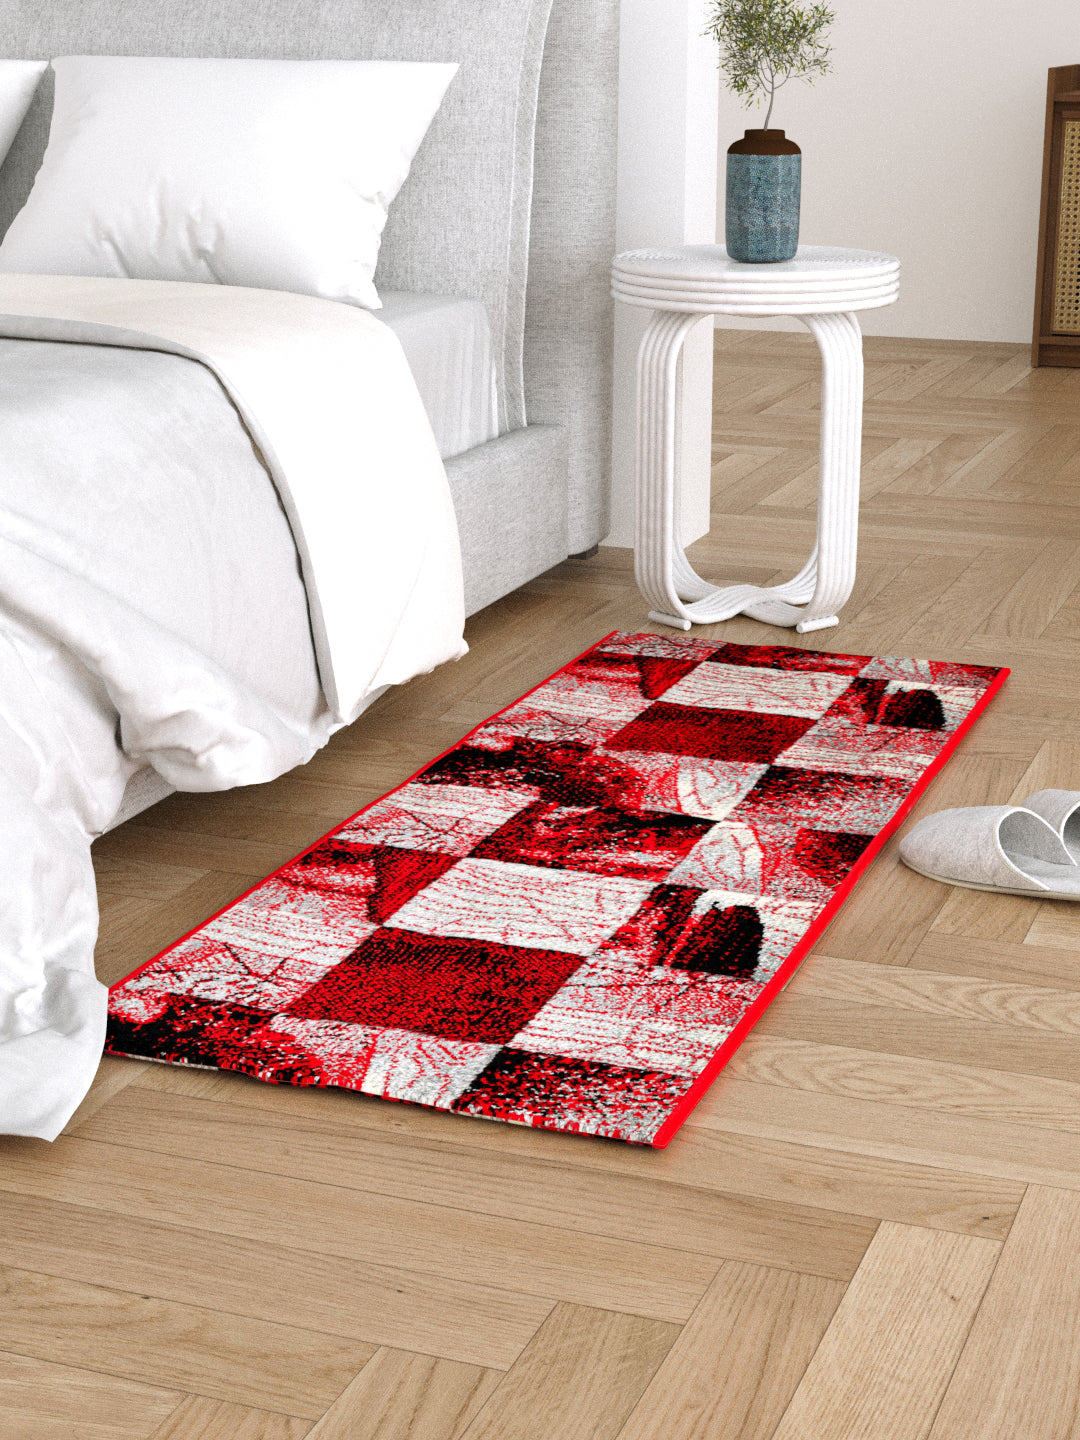 Bedside Runner Carpet Rug With Anti Skid Backing; 57x140 cms; Maroon Grey Checks